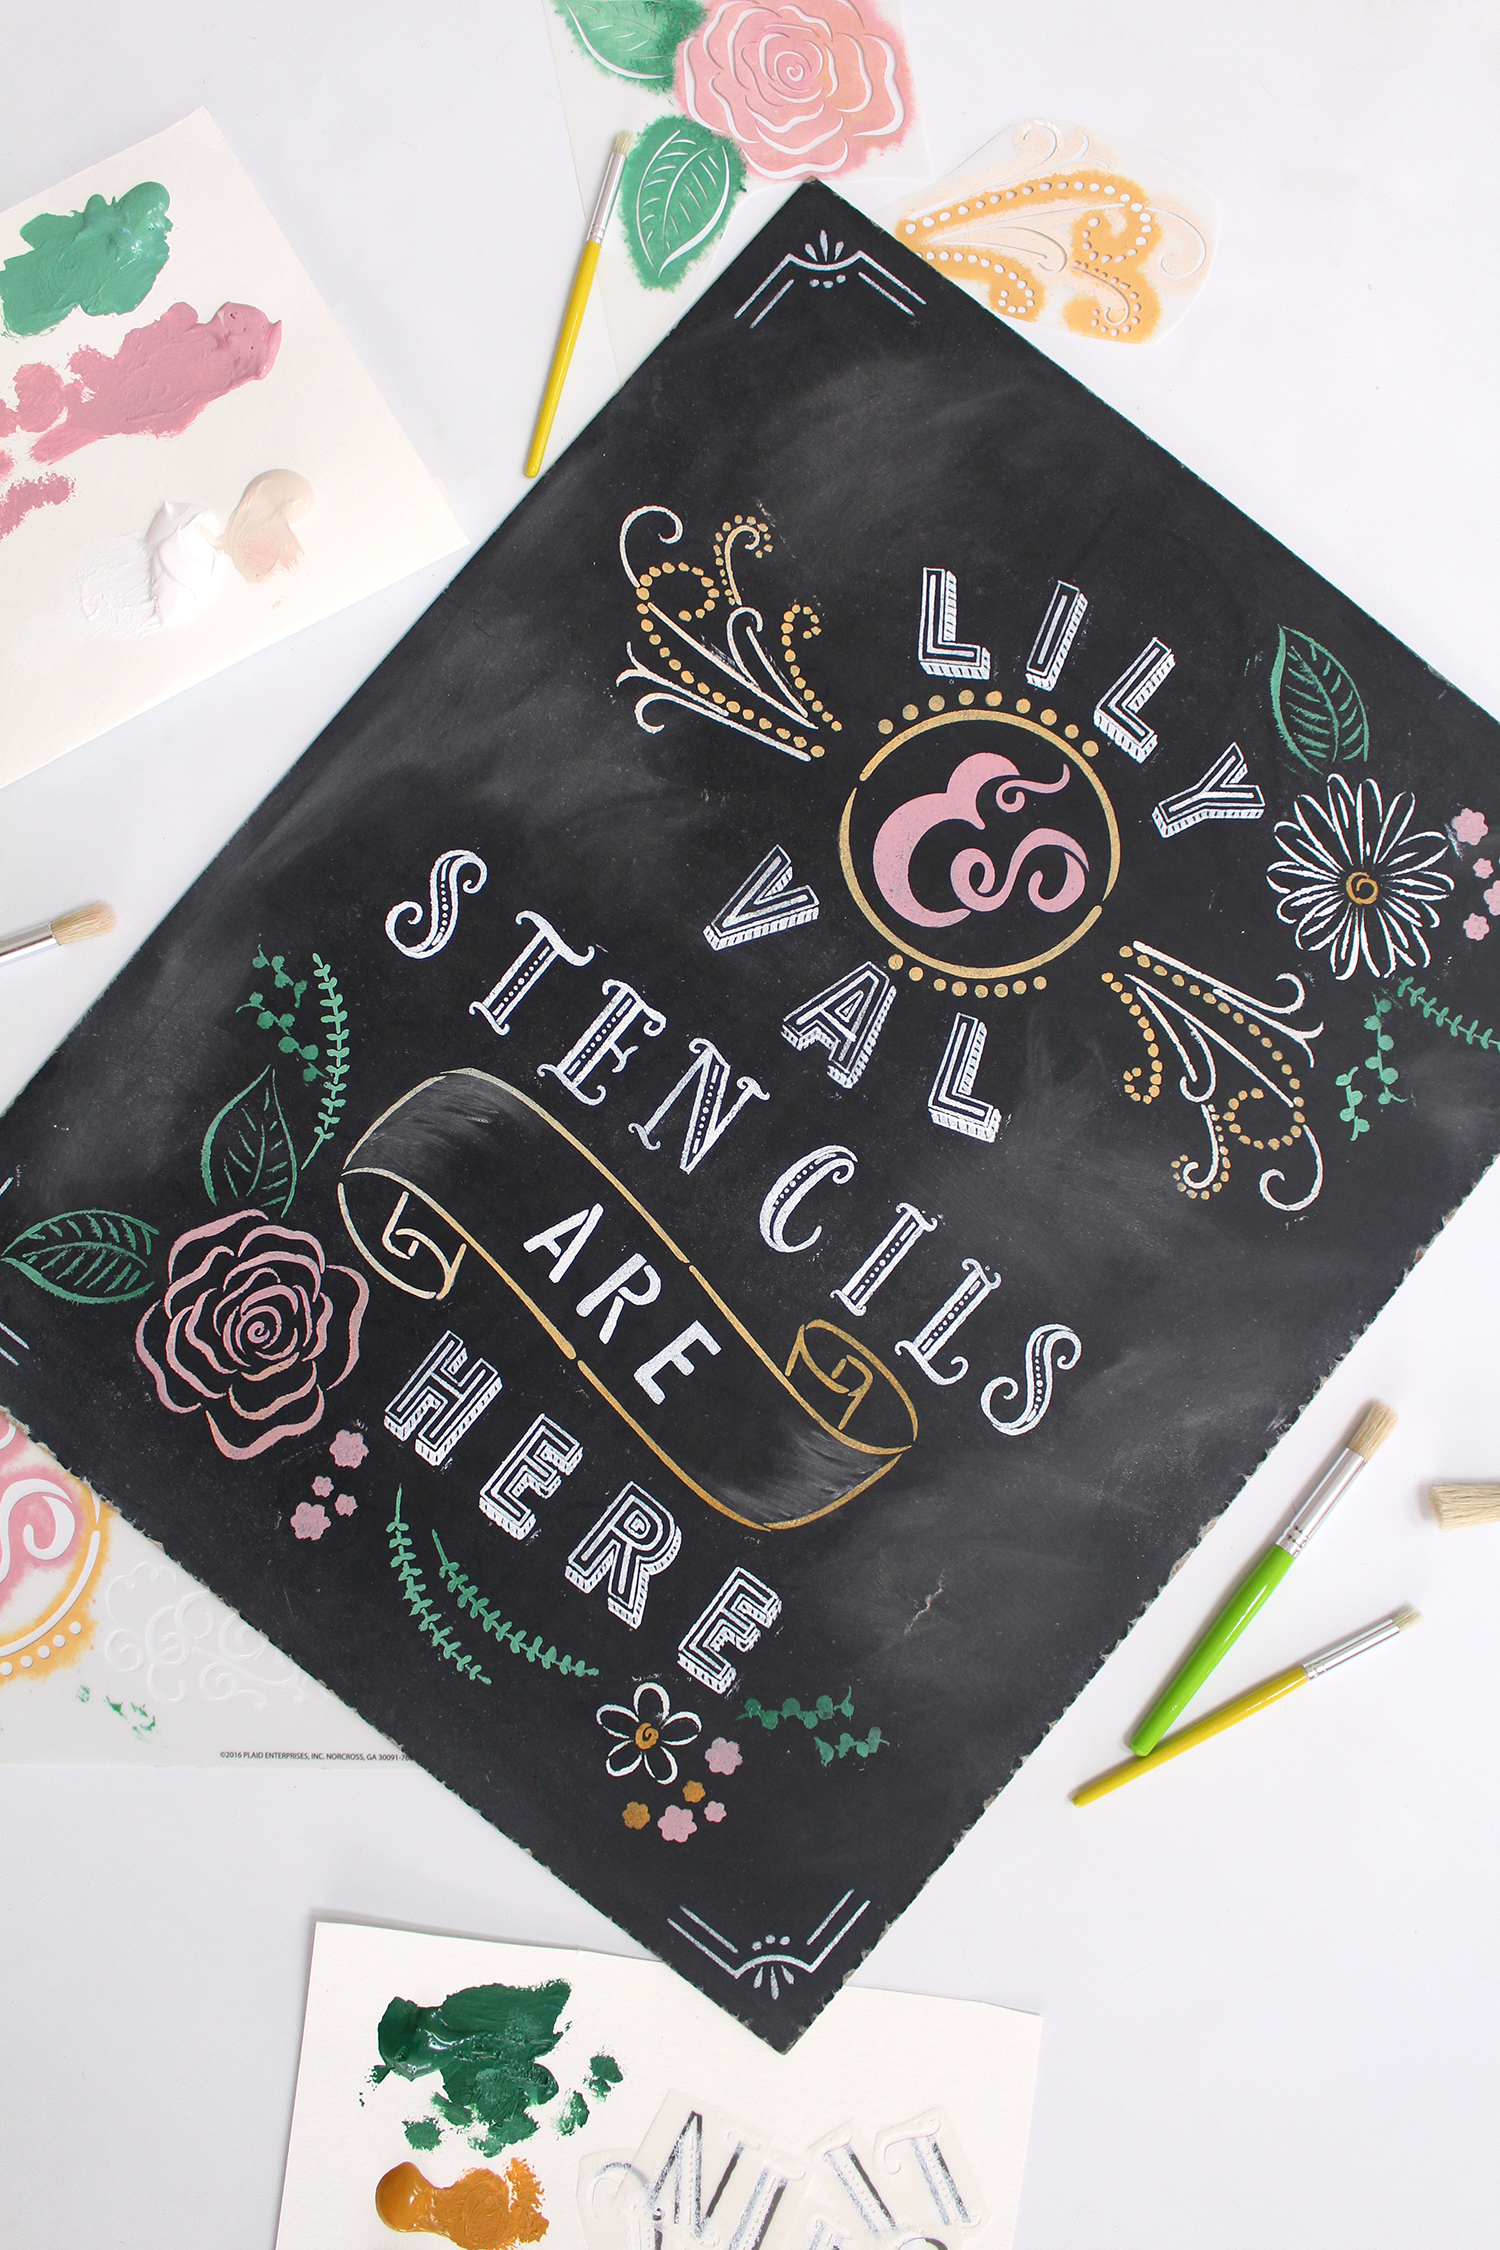 Introducing Lily & Val Chalkboard Lettering Stencils! Create gorgeous pieces of chalkboard art featuring Valerie McKeehan's signature hand lettering and embellishments. Available from Plaid Crafts at Michaels!